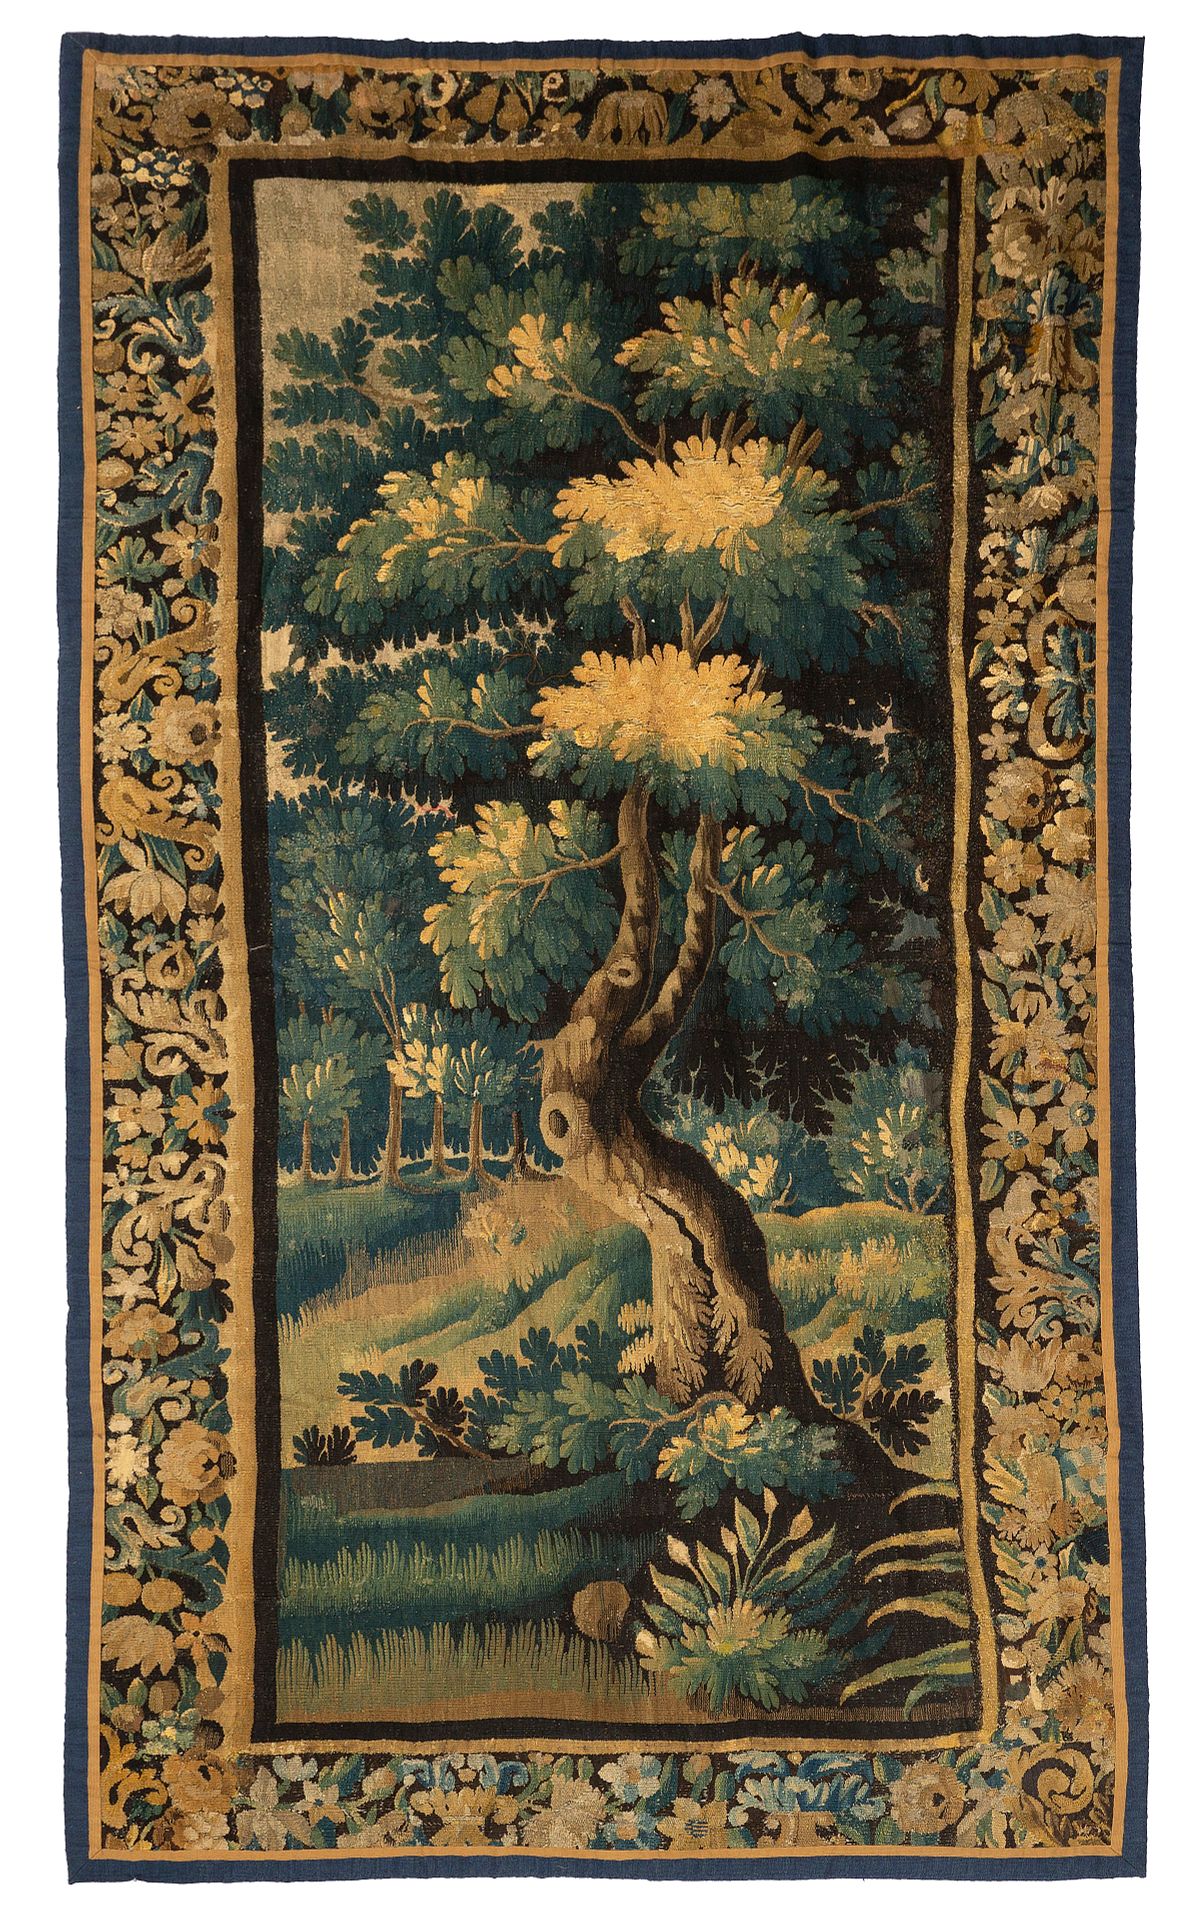 Null Aubusson tapestry, late 17th century, early 18th century

Technical charact&hellip;